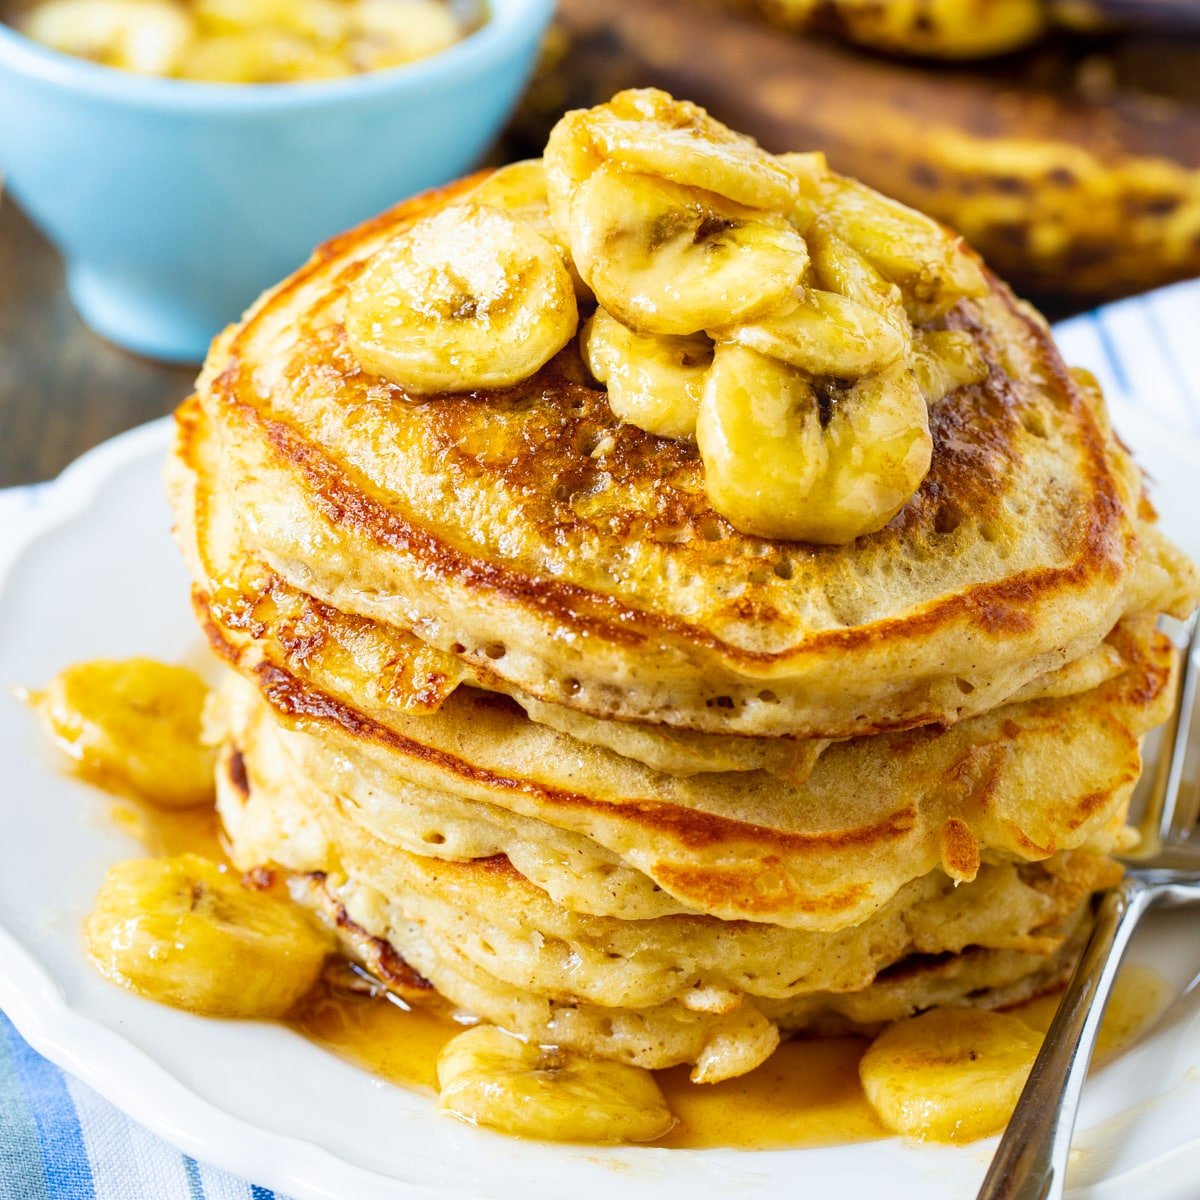 Stack of Banana Pancakes with Caramel Syrup on a plate.